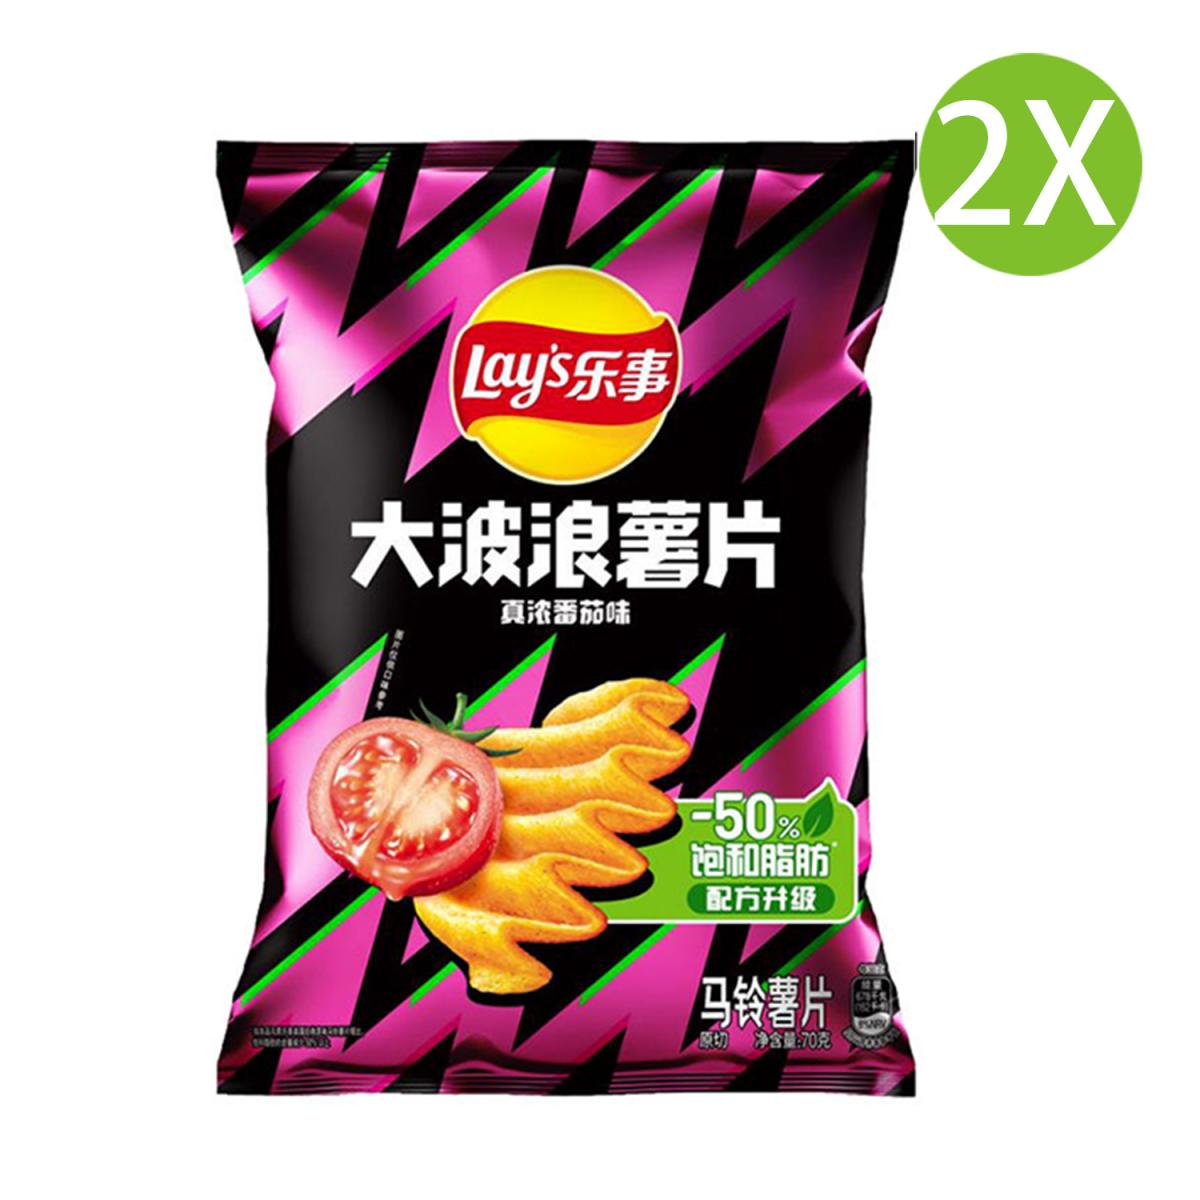 2X Lays Big Wave Potato Chips with Rich Tomato Flavor (70g x 2)(Random packaging) (New and old packaging replacement random shipment)